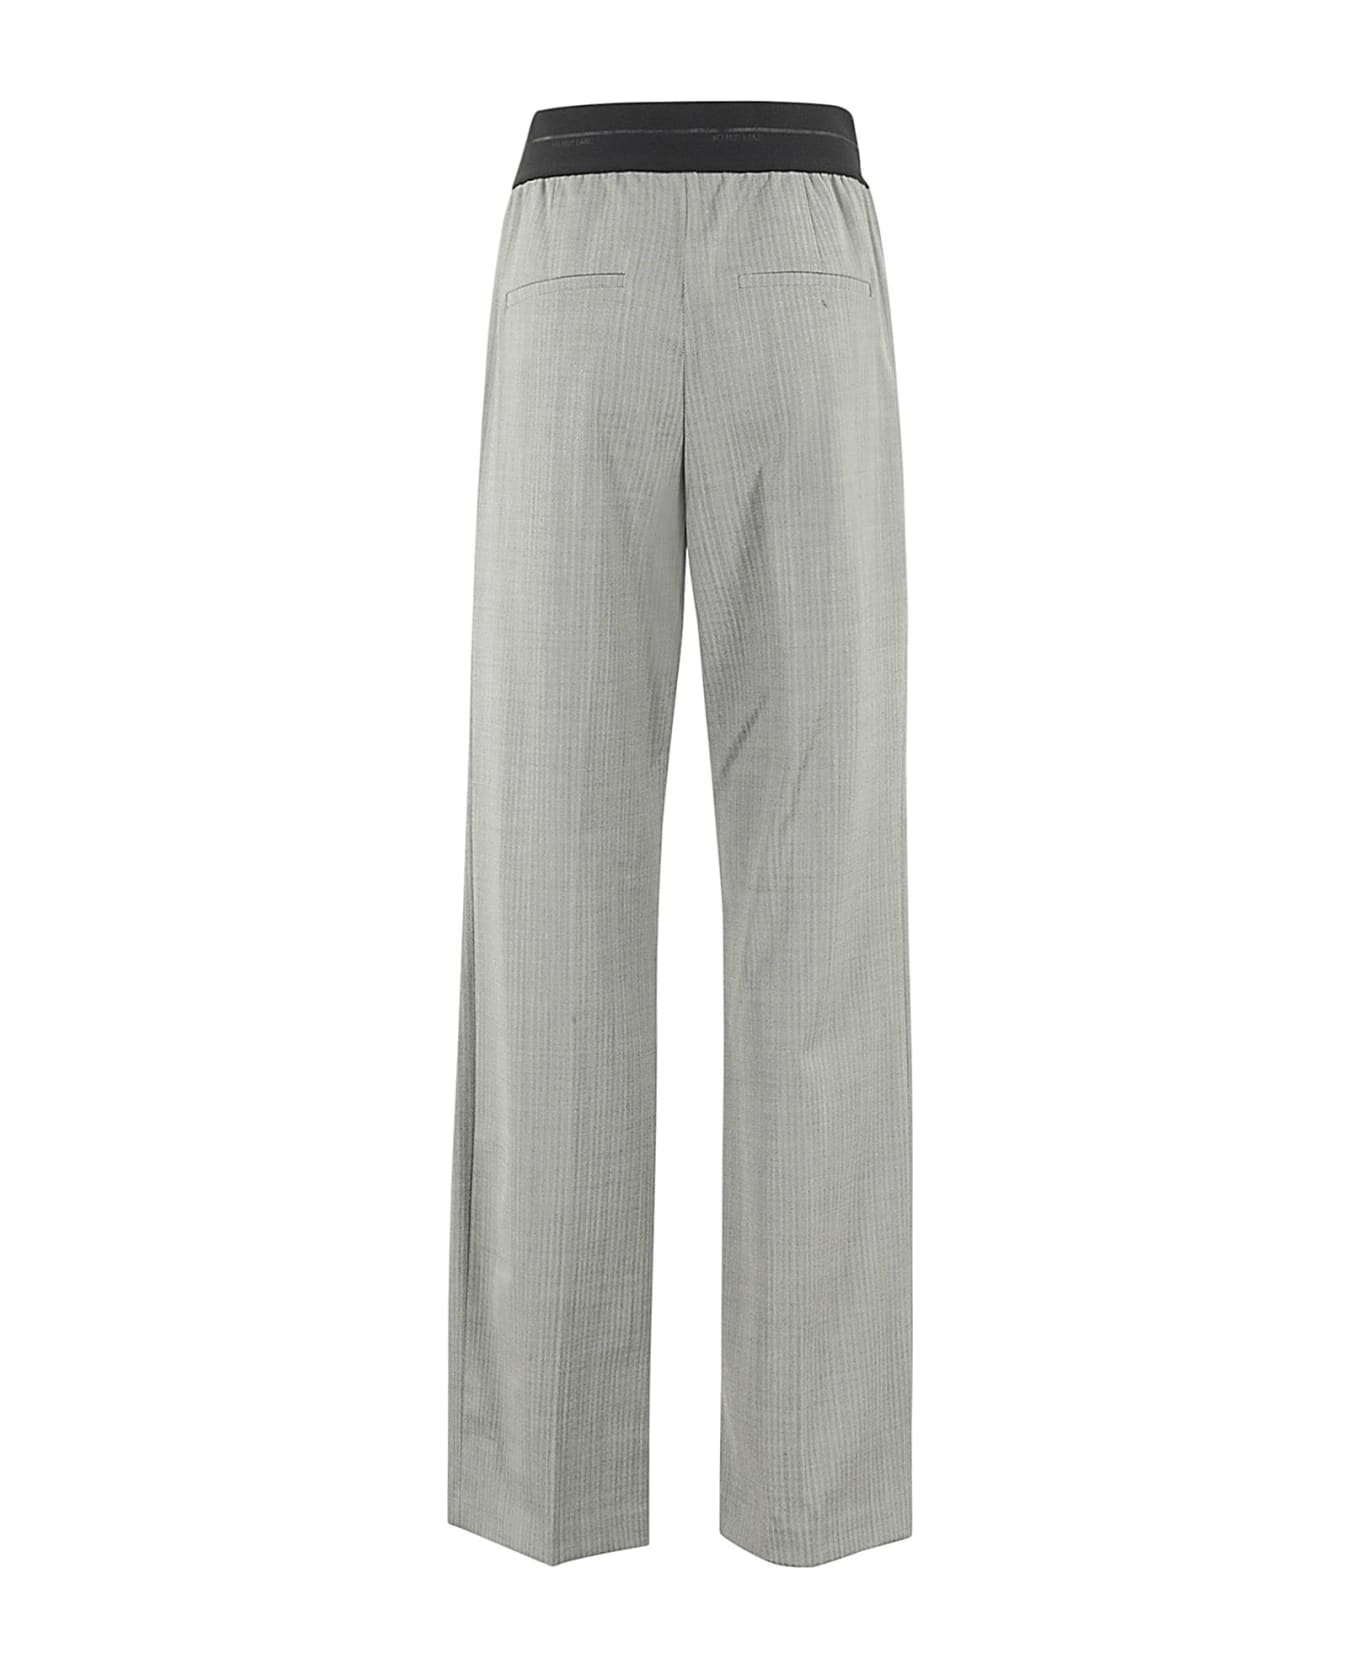 Helmut Lang Pull On Suit Pant - Acx Black White